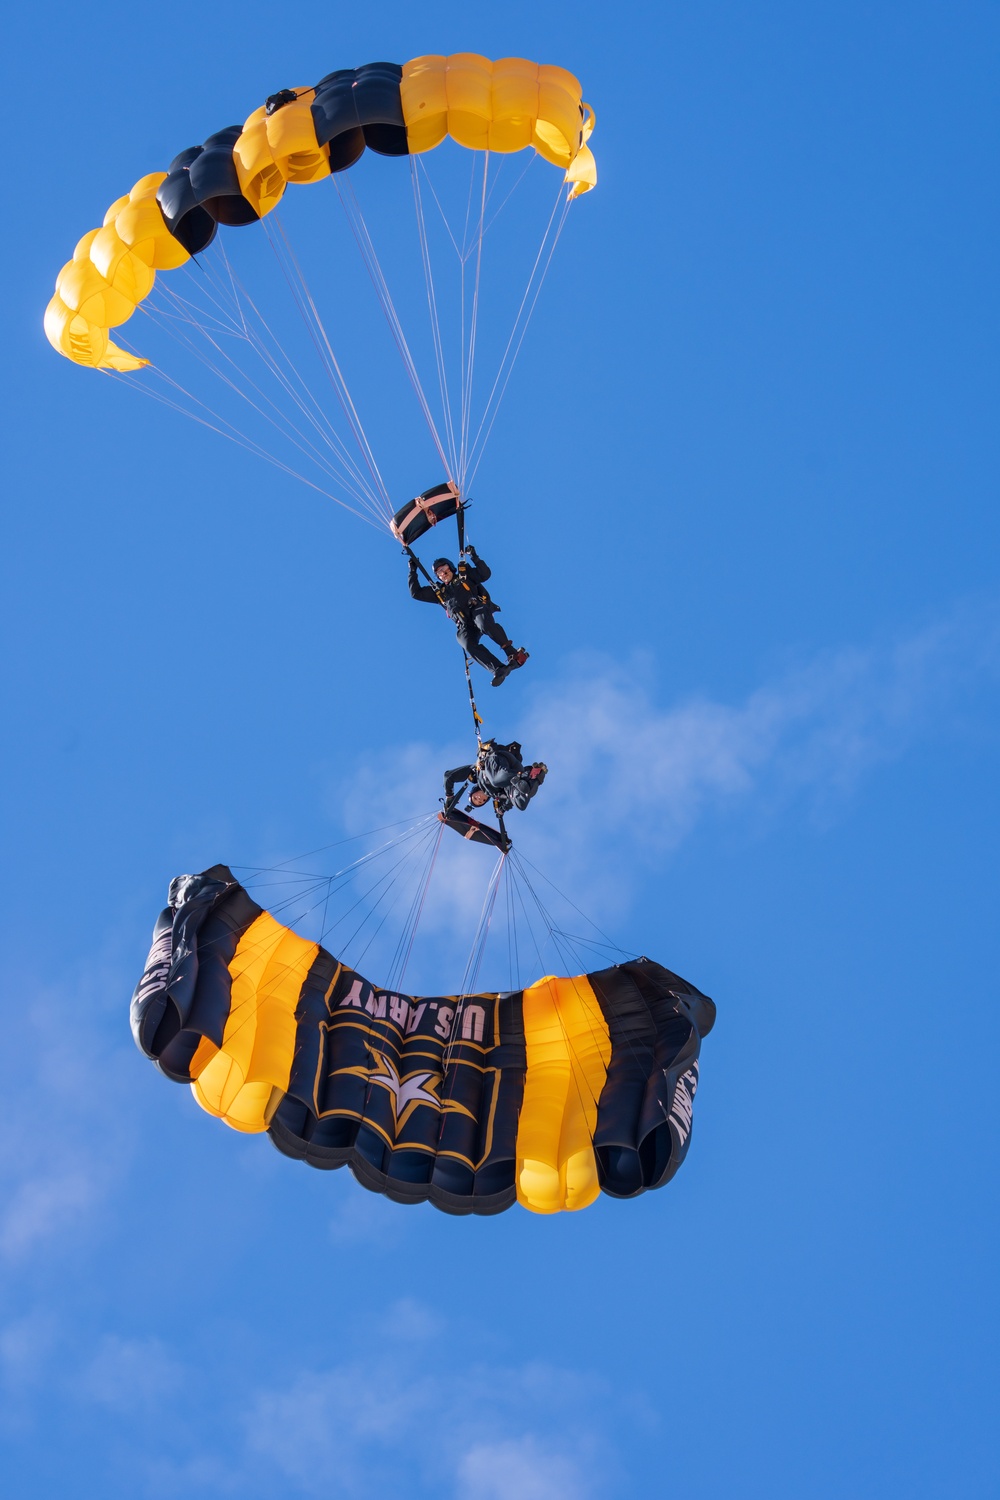 The U.S. Army Parachute Team performs at Pacific Airshow